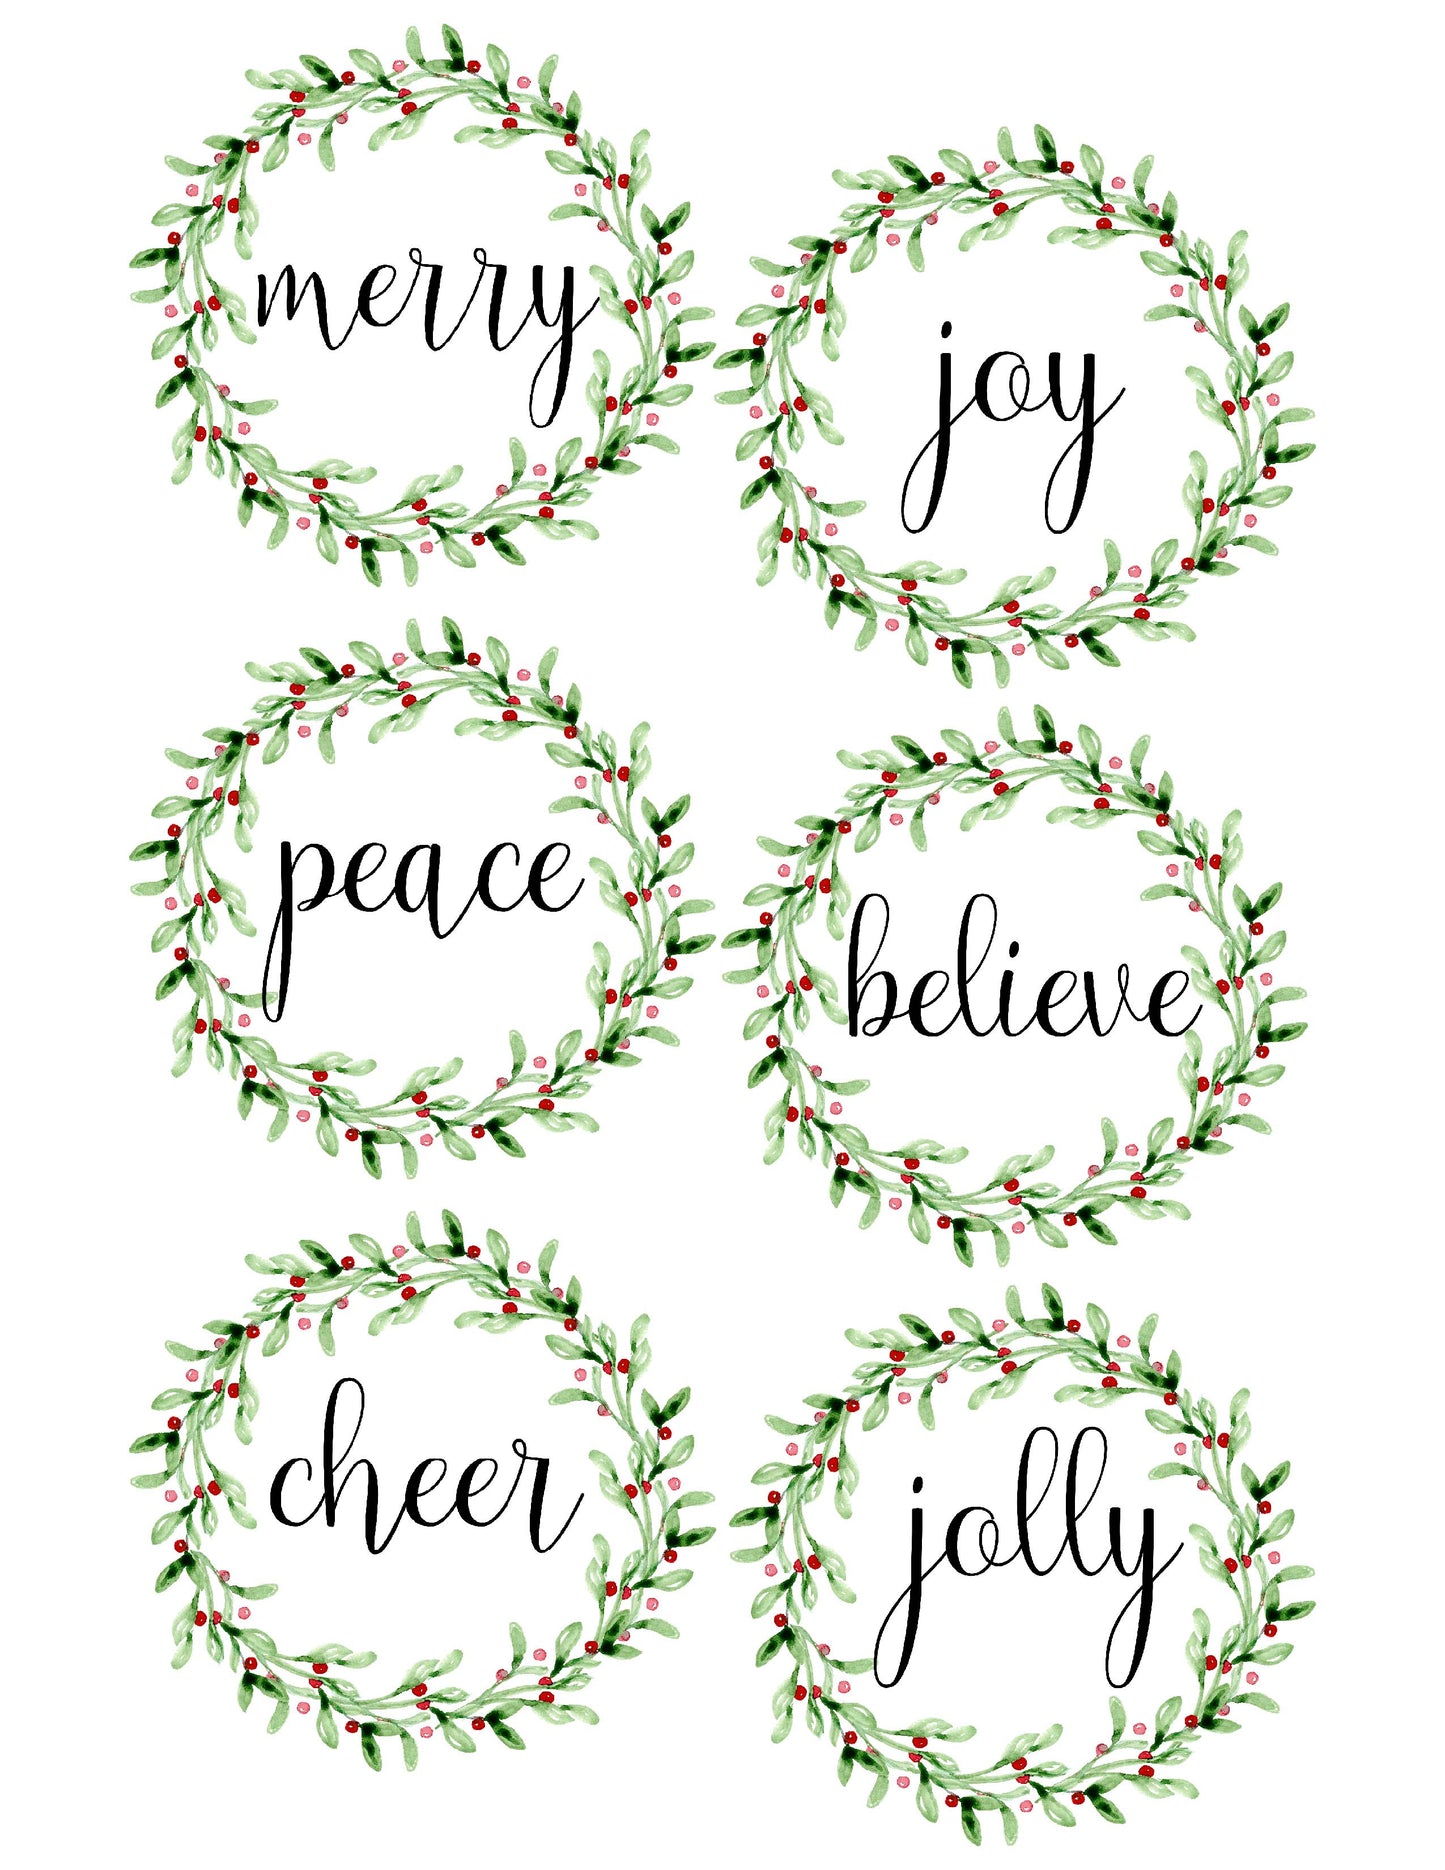 Watercolor Mistletoe Wreath with Holiday Wording Pillow Cover - Merry, Jolly, Joy, Peace, Noel, Believe, Cheer